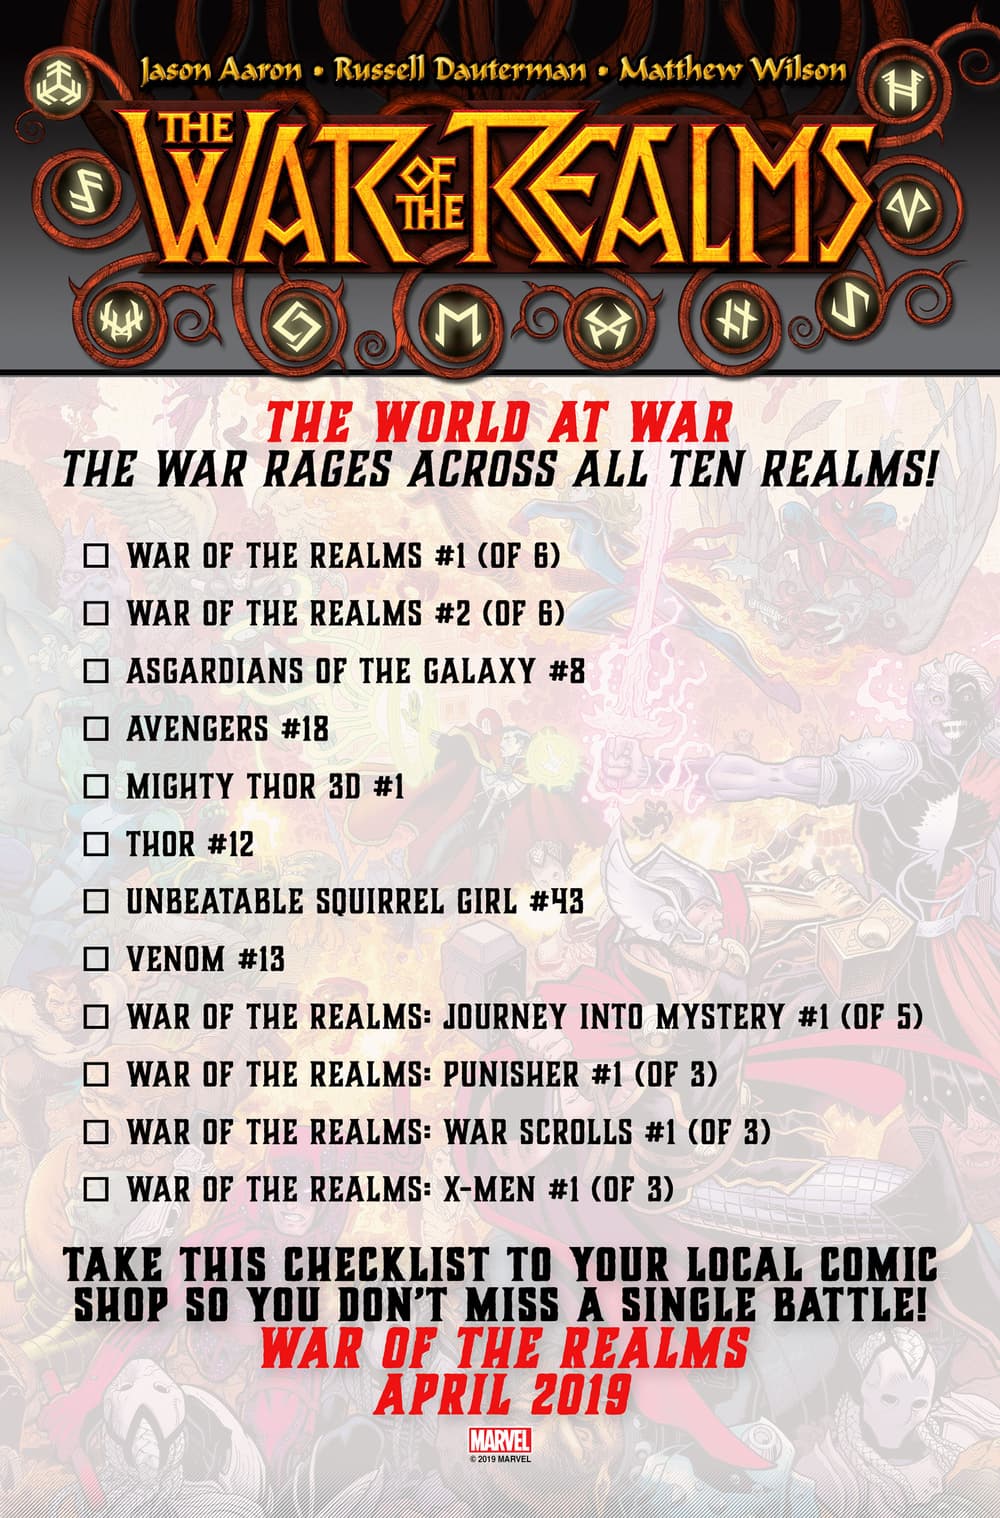 War of the Realms April checklist